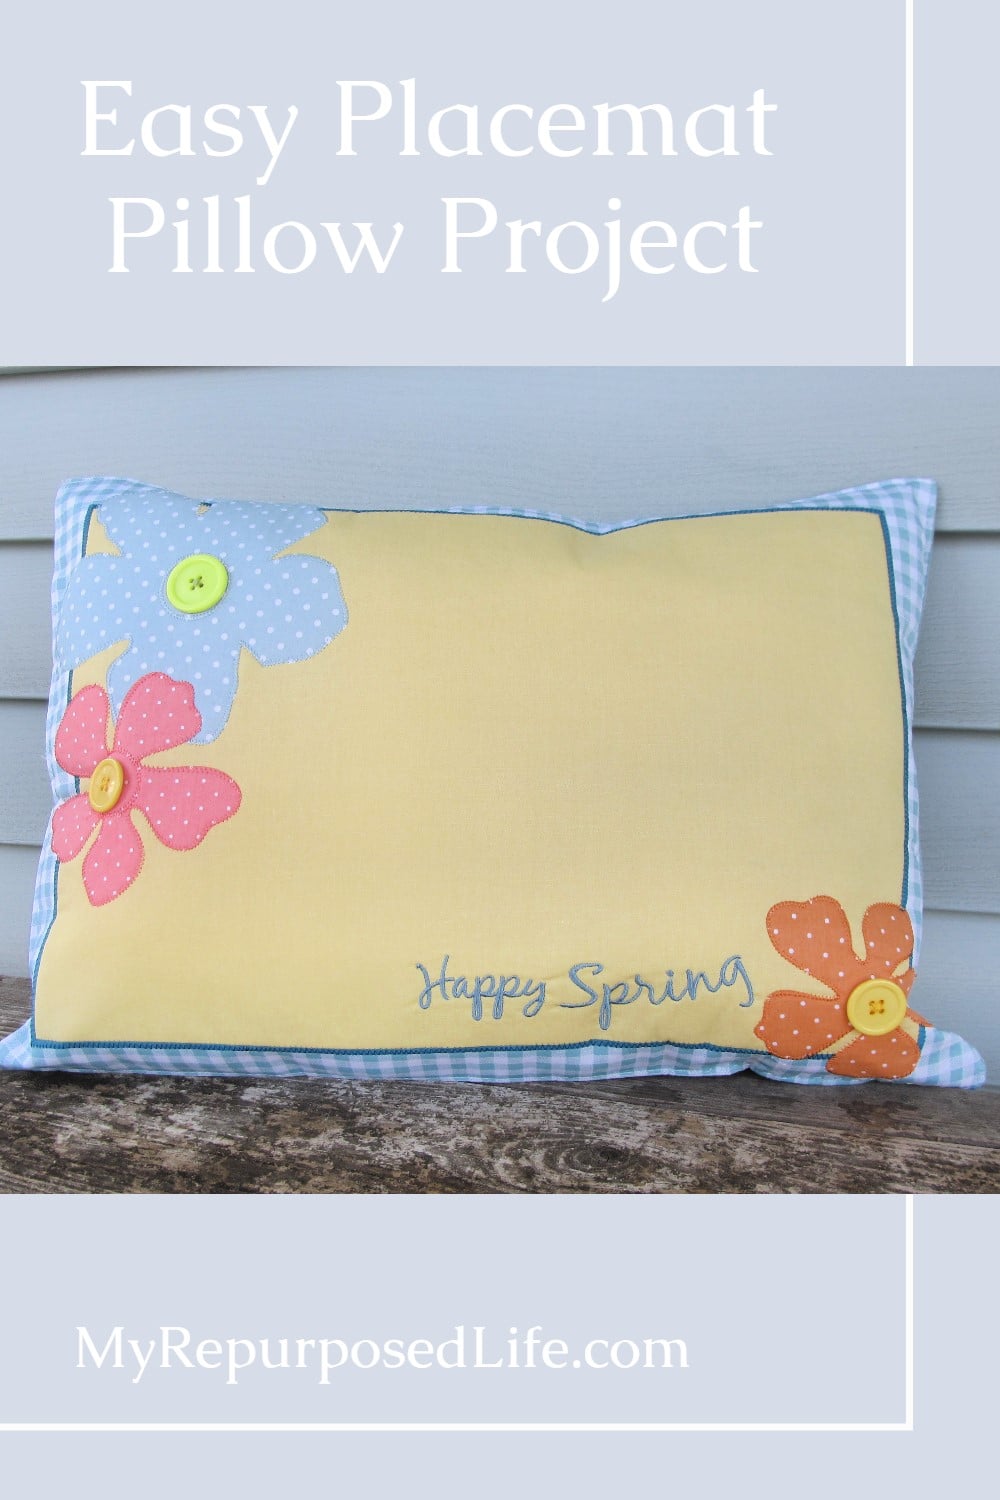 Transform your plain placemats into stylish pillows with our easy DIY placemat pillow tutorial. Elevate your home decor with personalized pillows made from materials you already have on hand. Follow our step-by-step instructions and create a cozy and unique accent piece for your living space. Perfect for beginners and seasoned DIYers alike. Start your project today! #MyRepurposedLife #easy #pillow via @repurposedlife